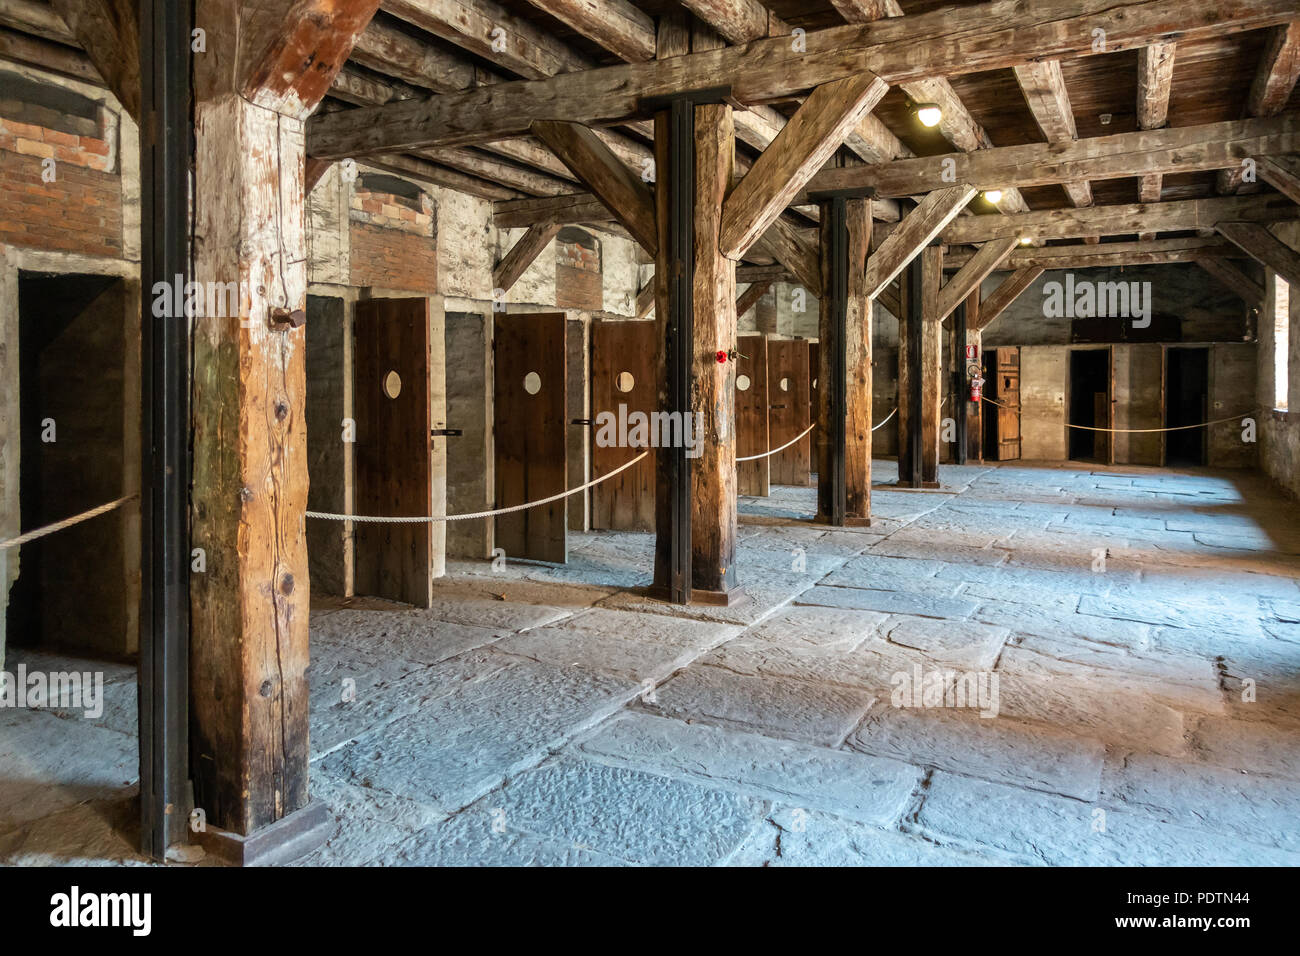 Trieste, Italy - 06 August 2018: Concentration camp Cell of the death camp Risiera di San Sabba. A former nazi concentration camp Stock Photo